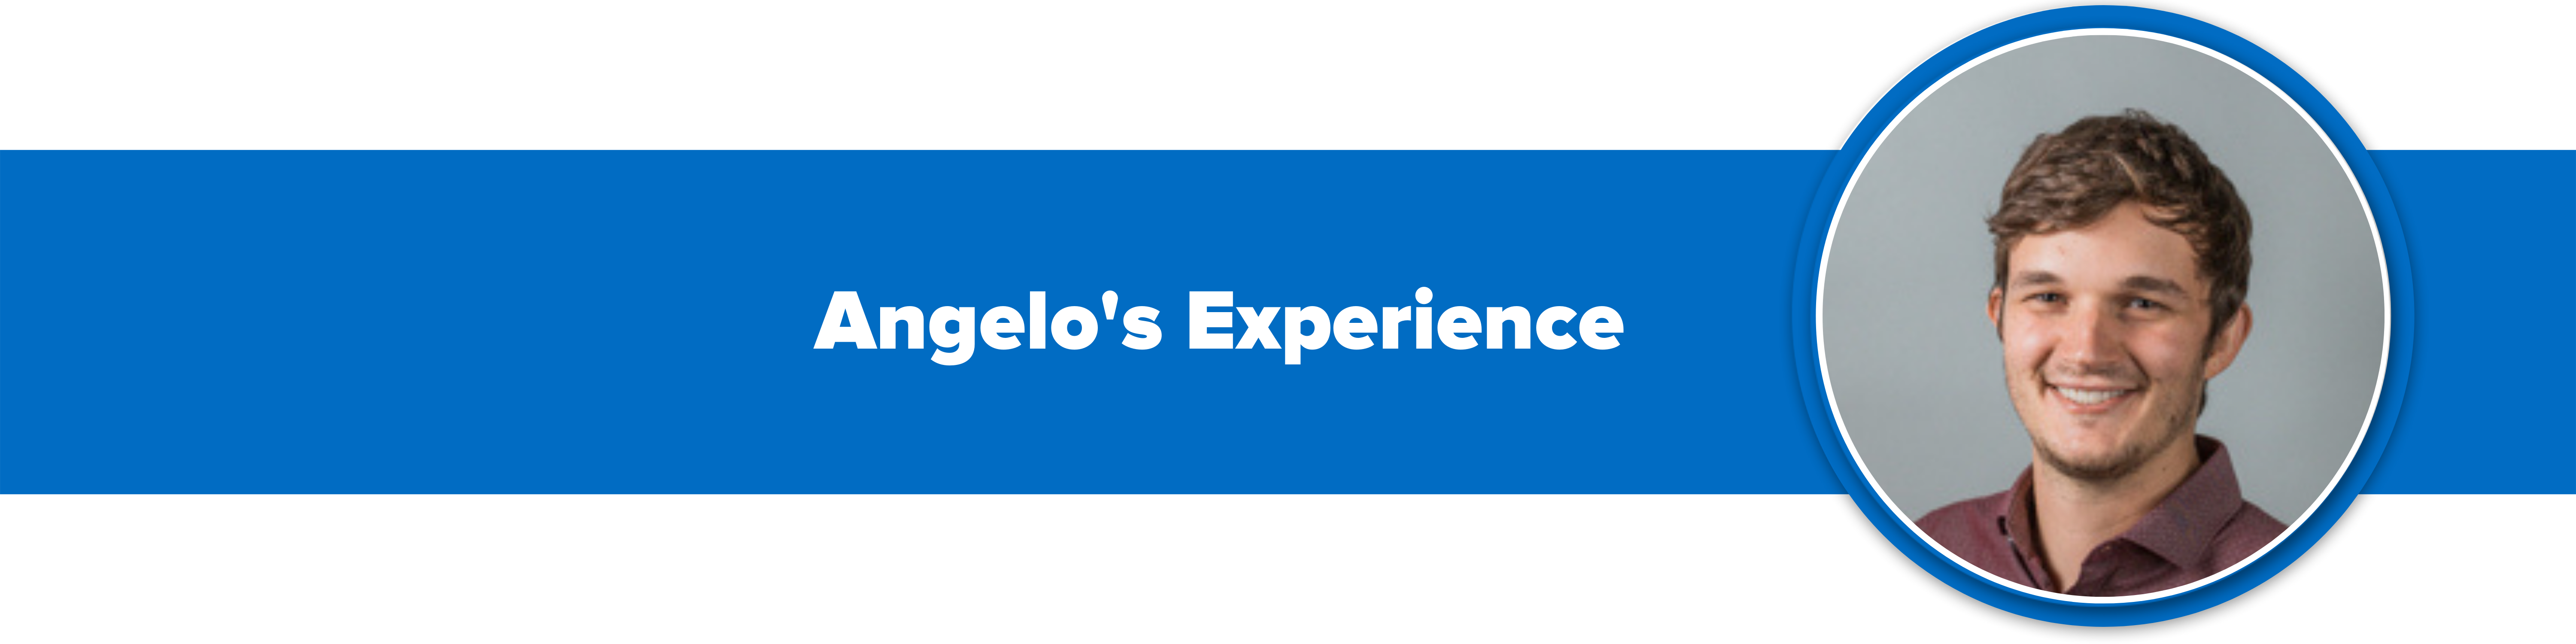 Header image with text "Angelo's Experience" and a headshot of Angelo Saorin, an Applications Engineer at Instrumart.